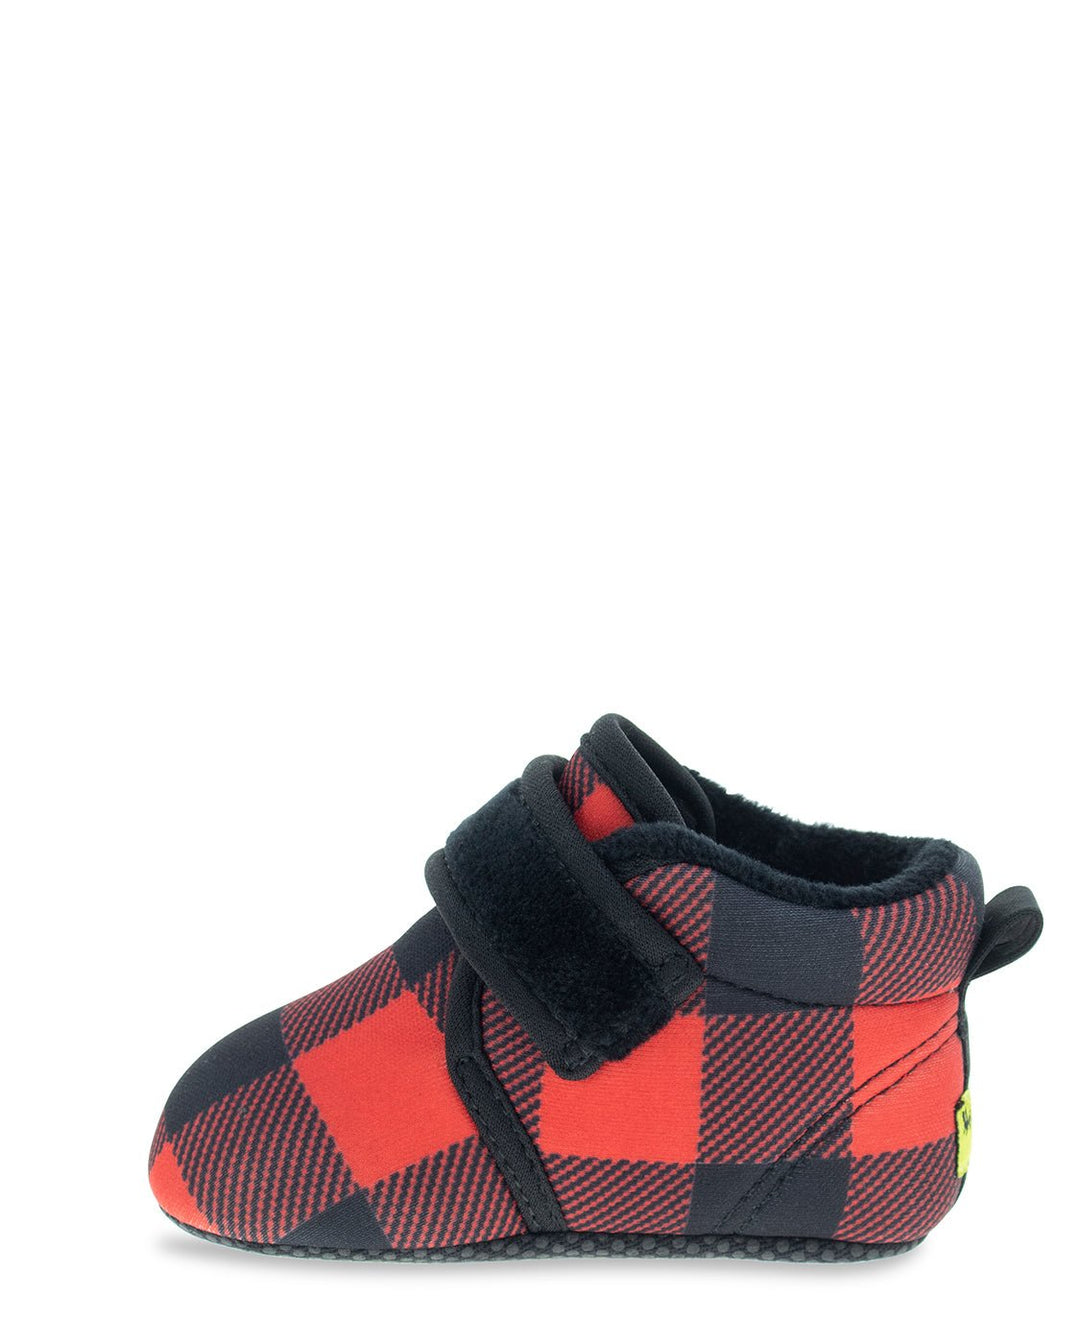 Kids Scooter Baby Boot - Red - Western Chief